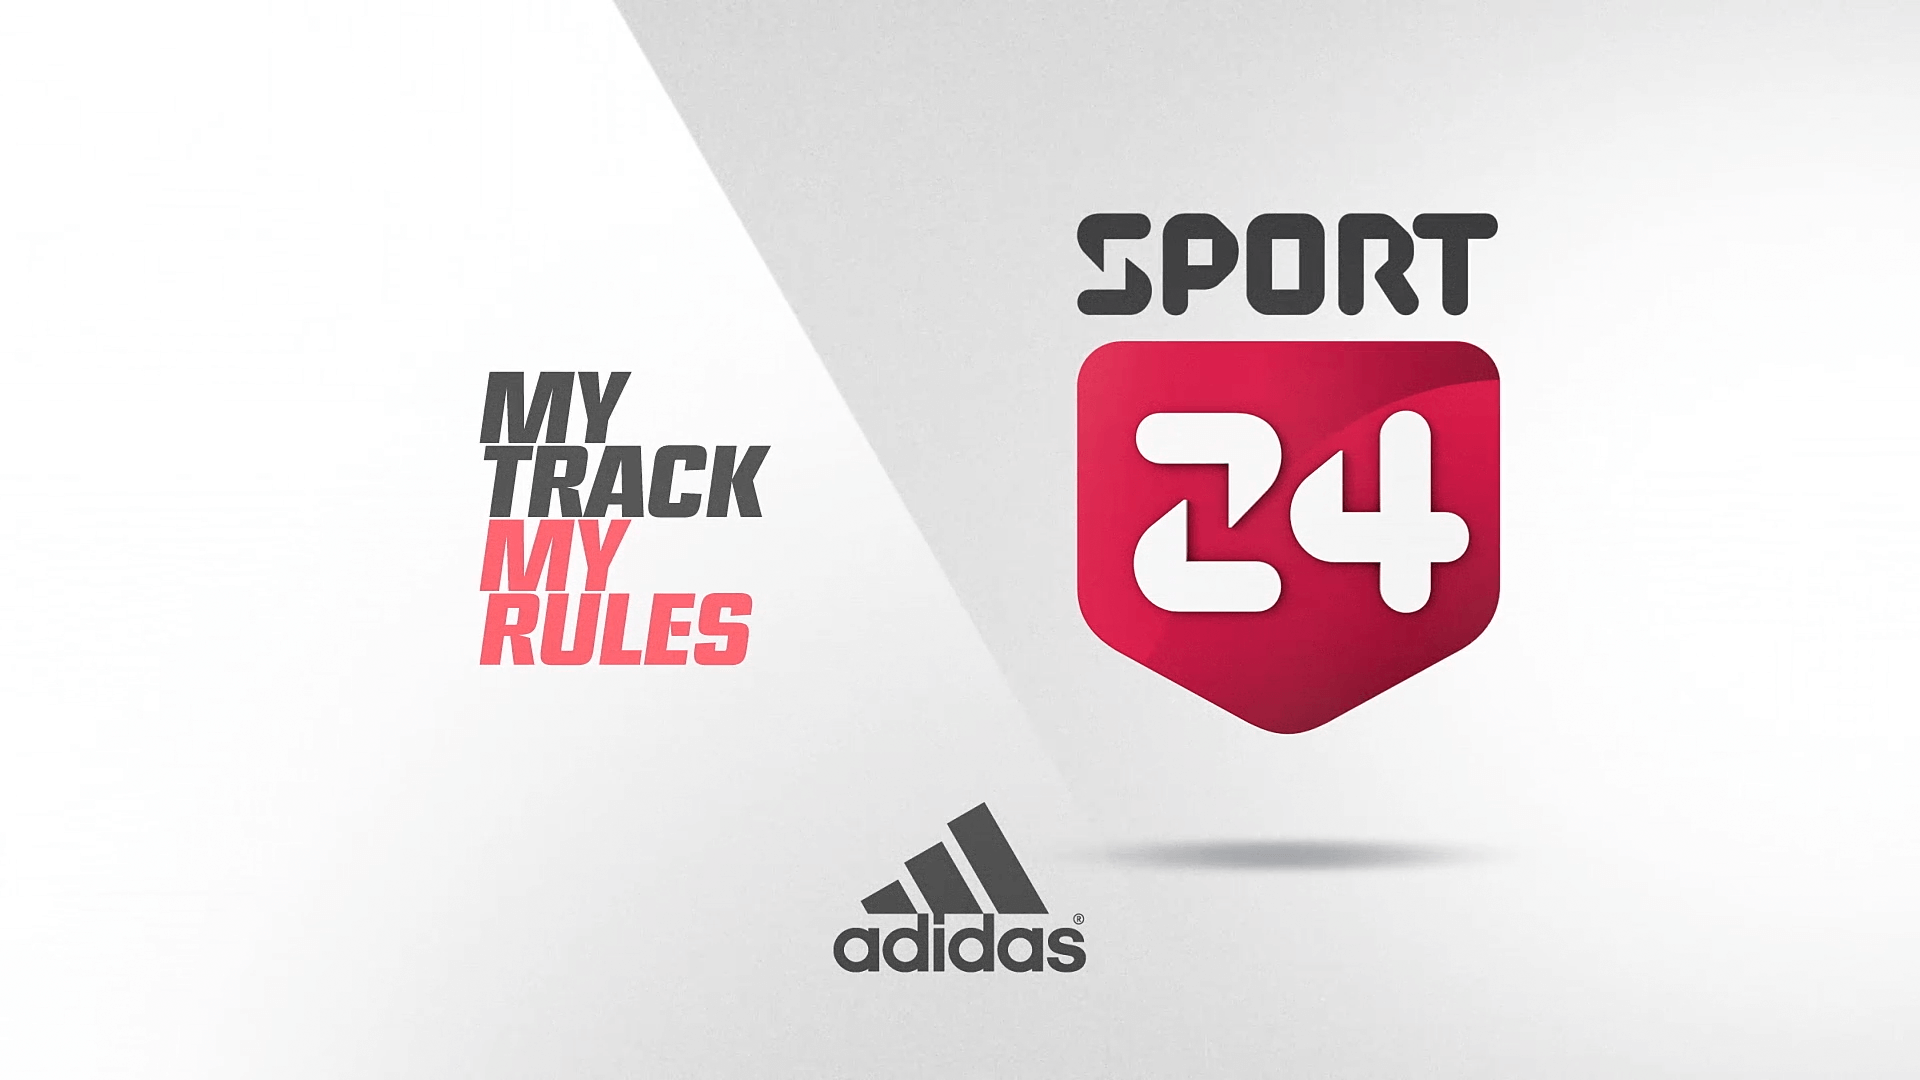 Sport24 - My Track My Rules (0-00-21-06).png